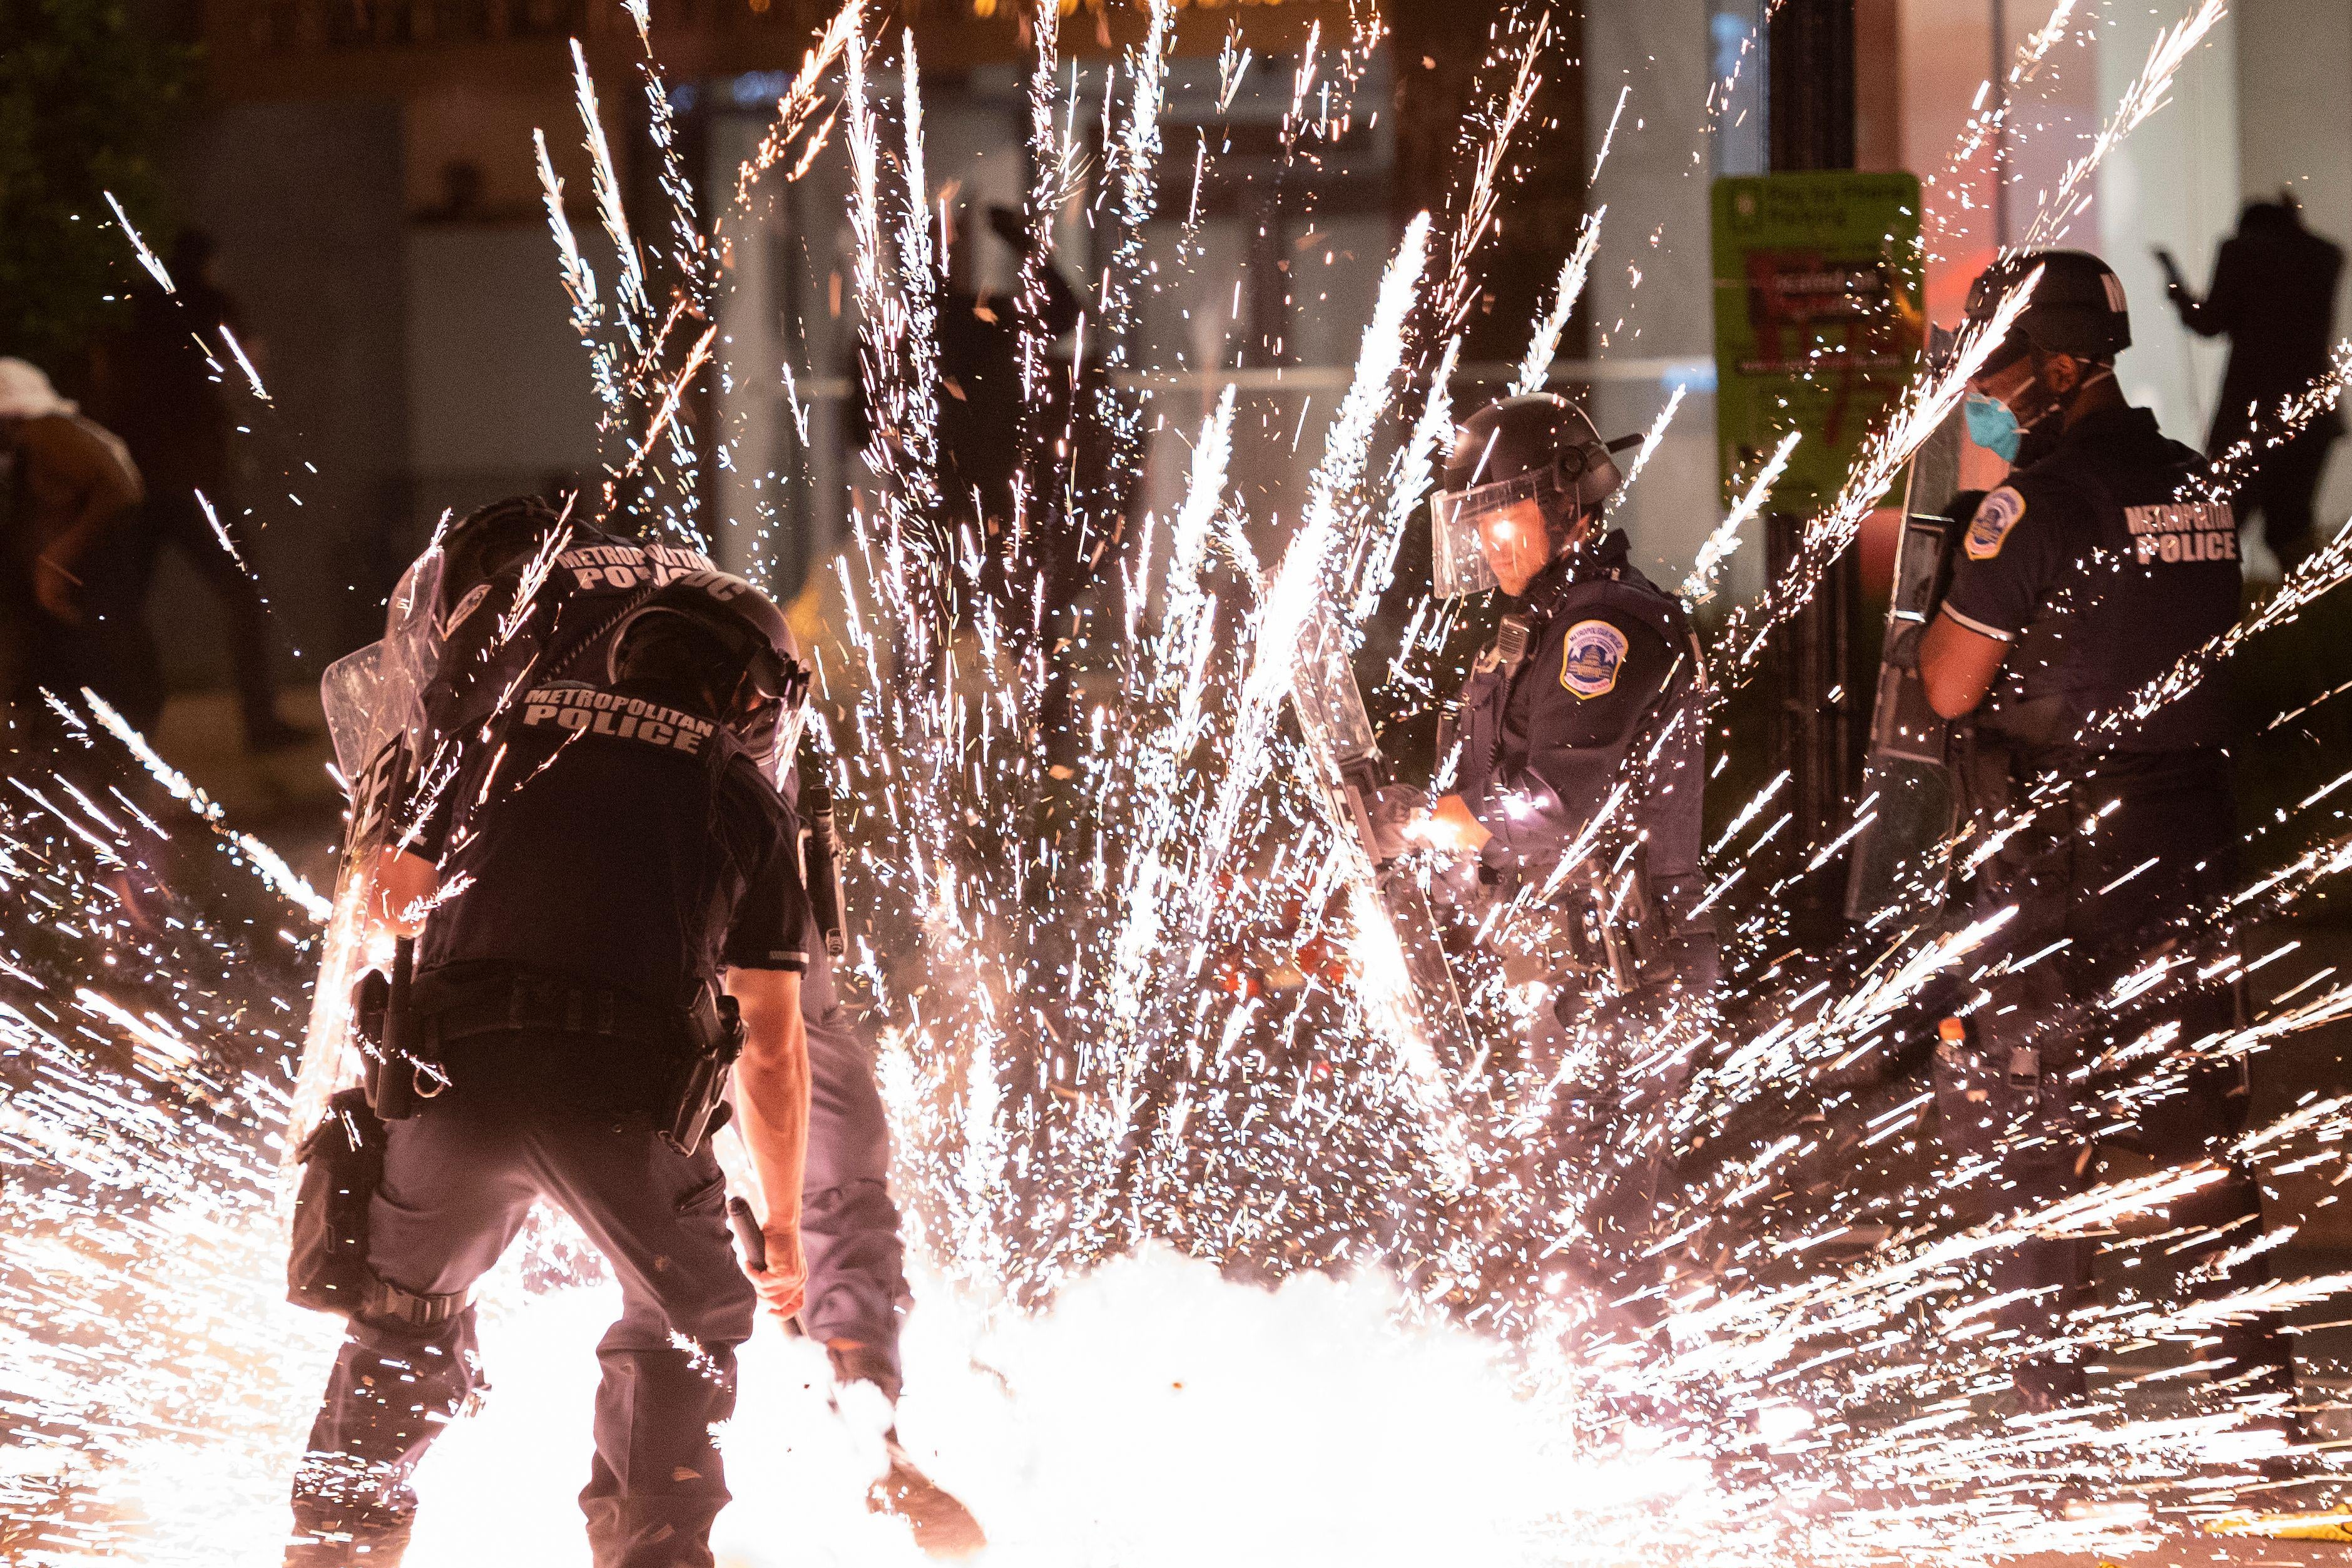 A firecracker thrown by protesters explodes under police one block from the White House on May 30, 2020 in Washington, D.C.